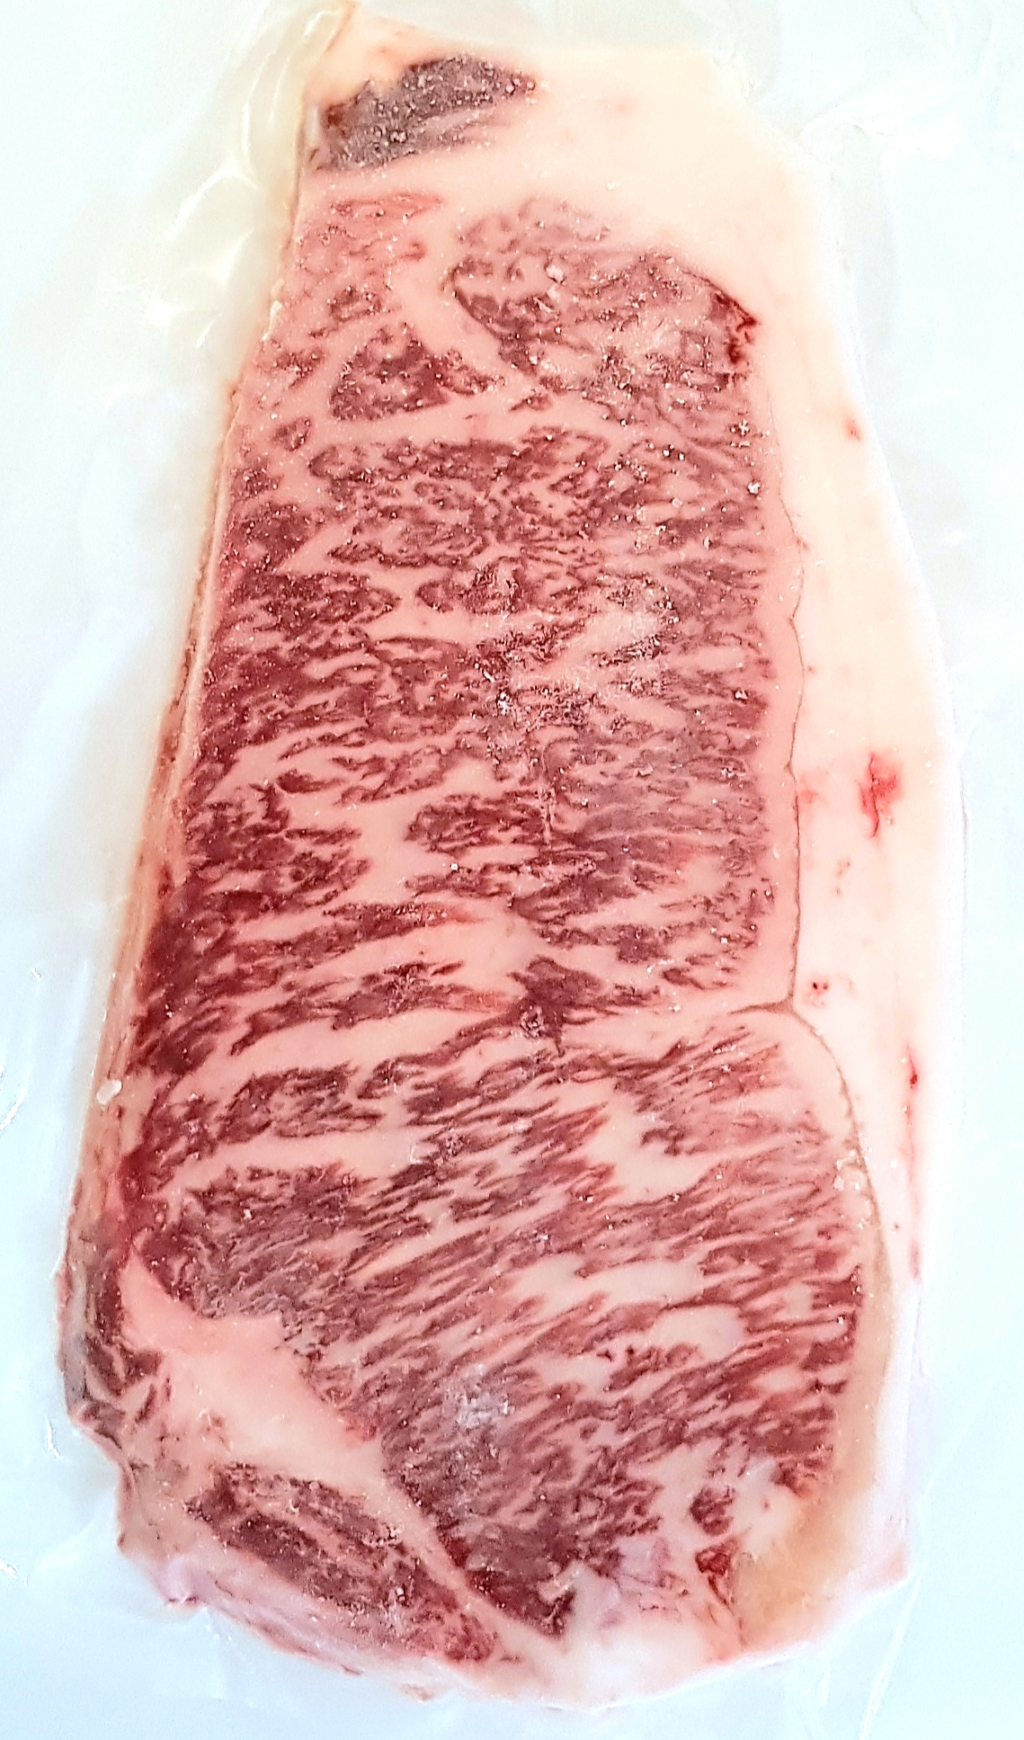 A4 Striploin is usually the most used part in Japanese Wagyu cuisine and the meat has a cap of fat which runs through the top part of the steak. This gives an extra fatty melt in your mouth feel with A5 grade meat in the center portion, providing the full Japanese beef flavor.